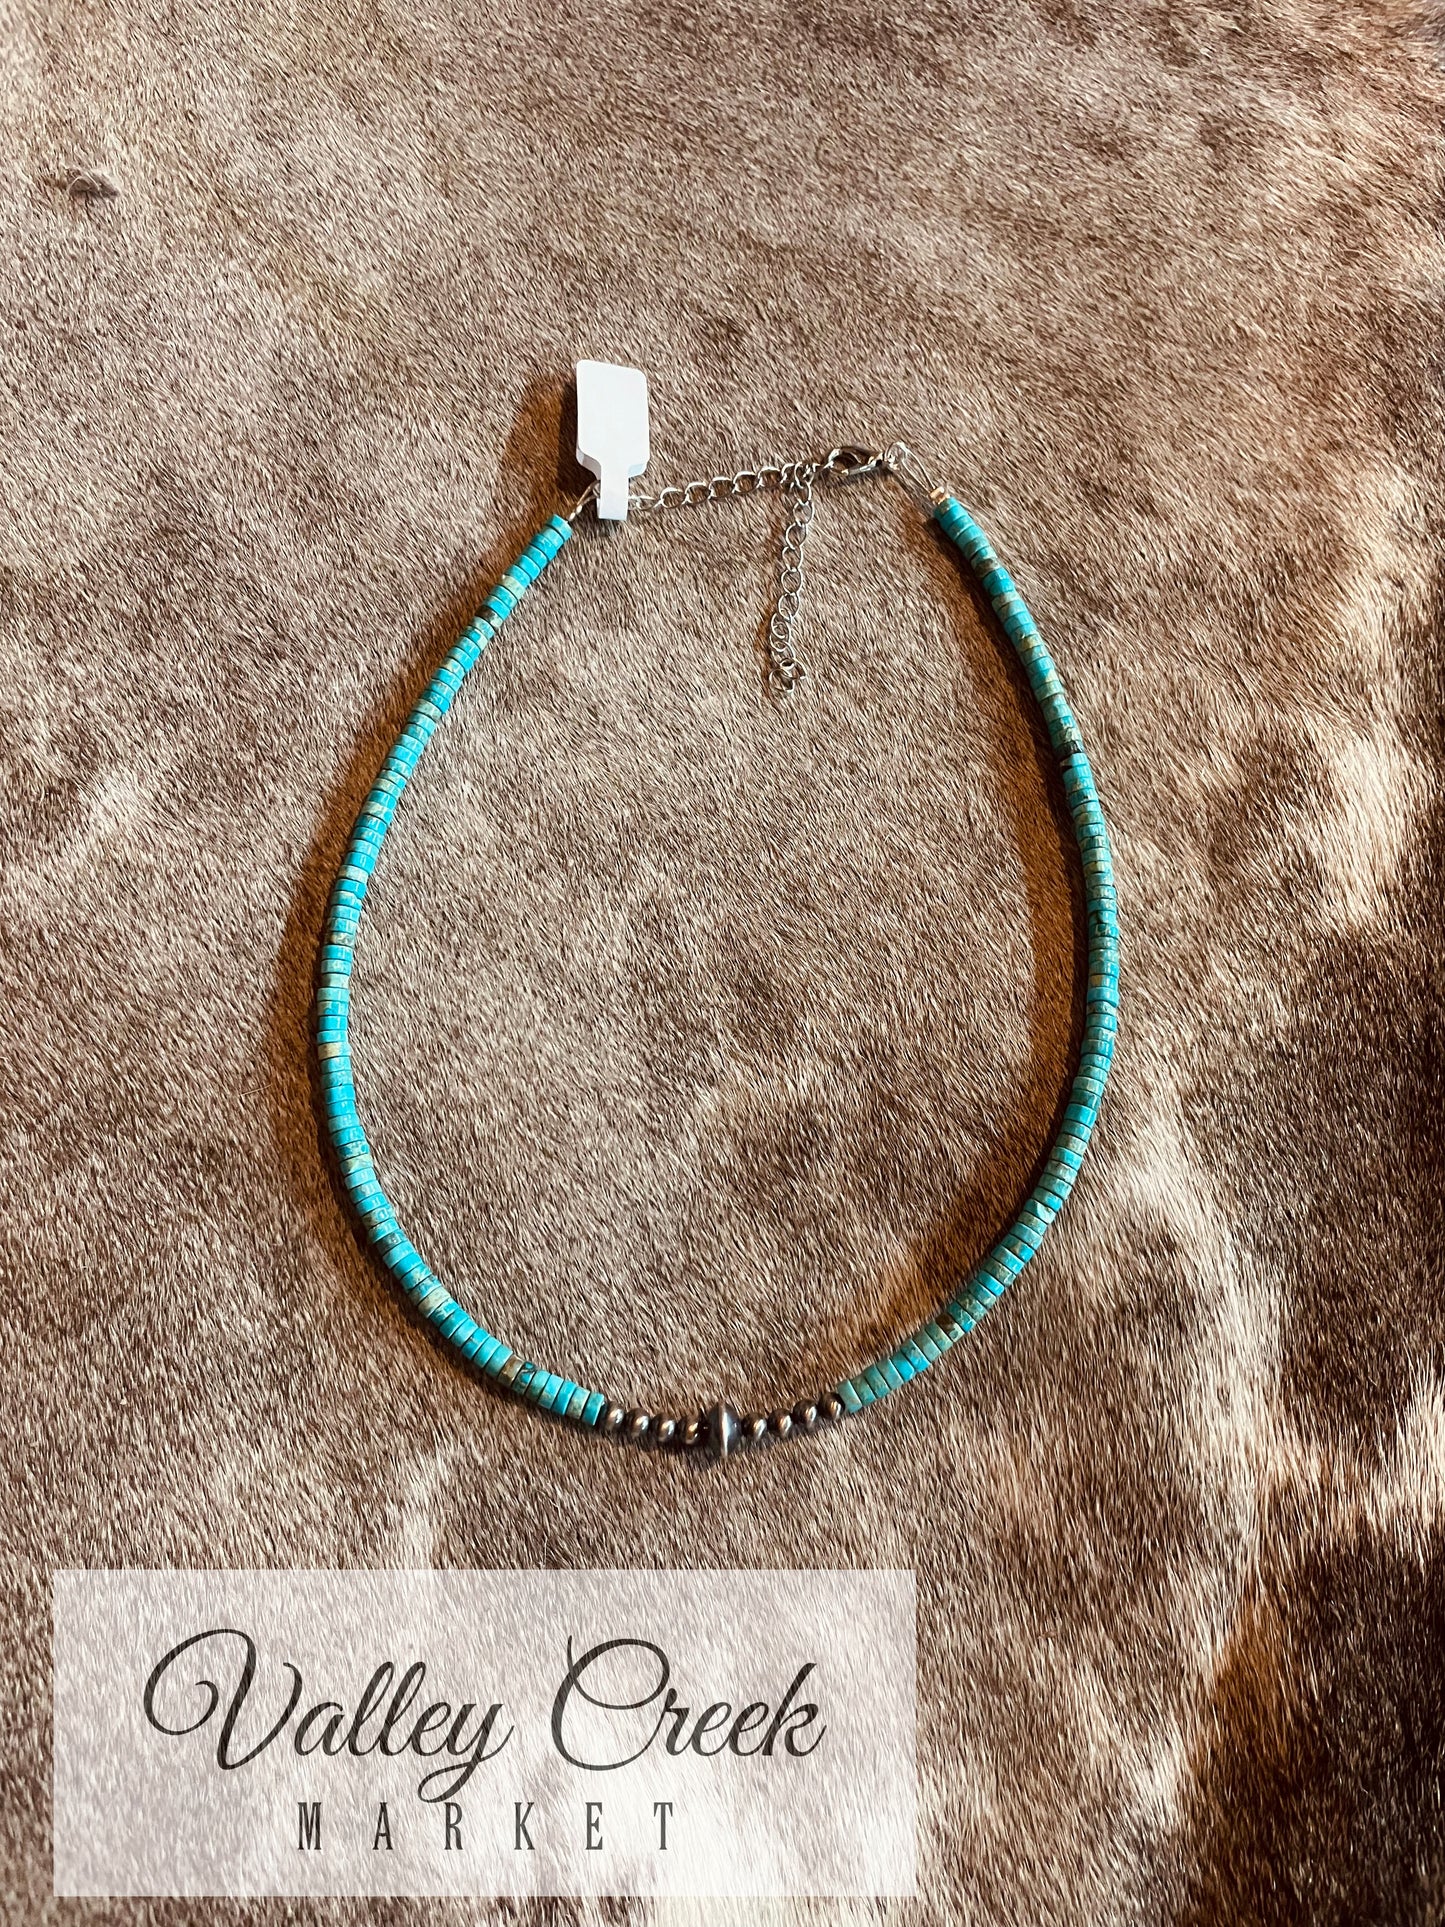 Authentic Navajo Choker Necklace